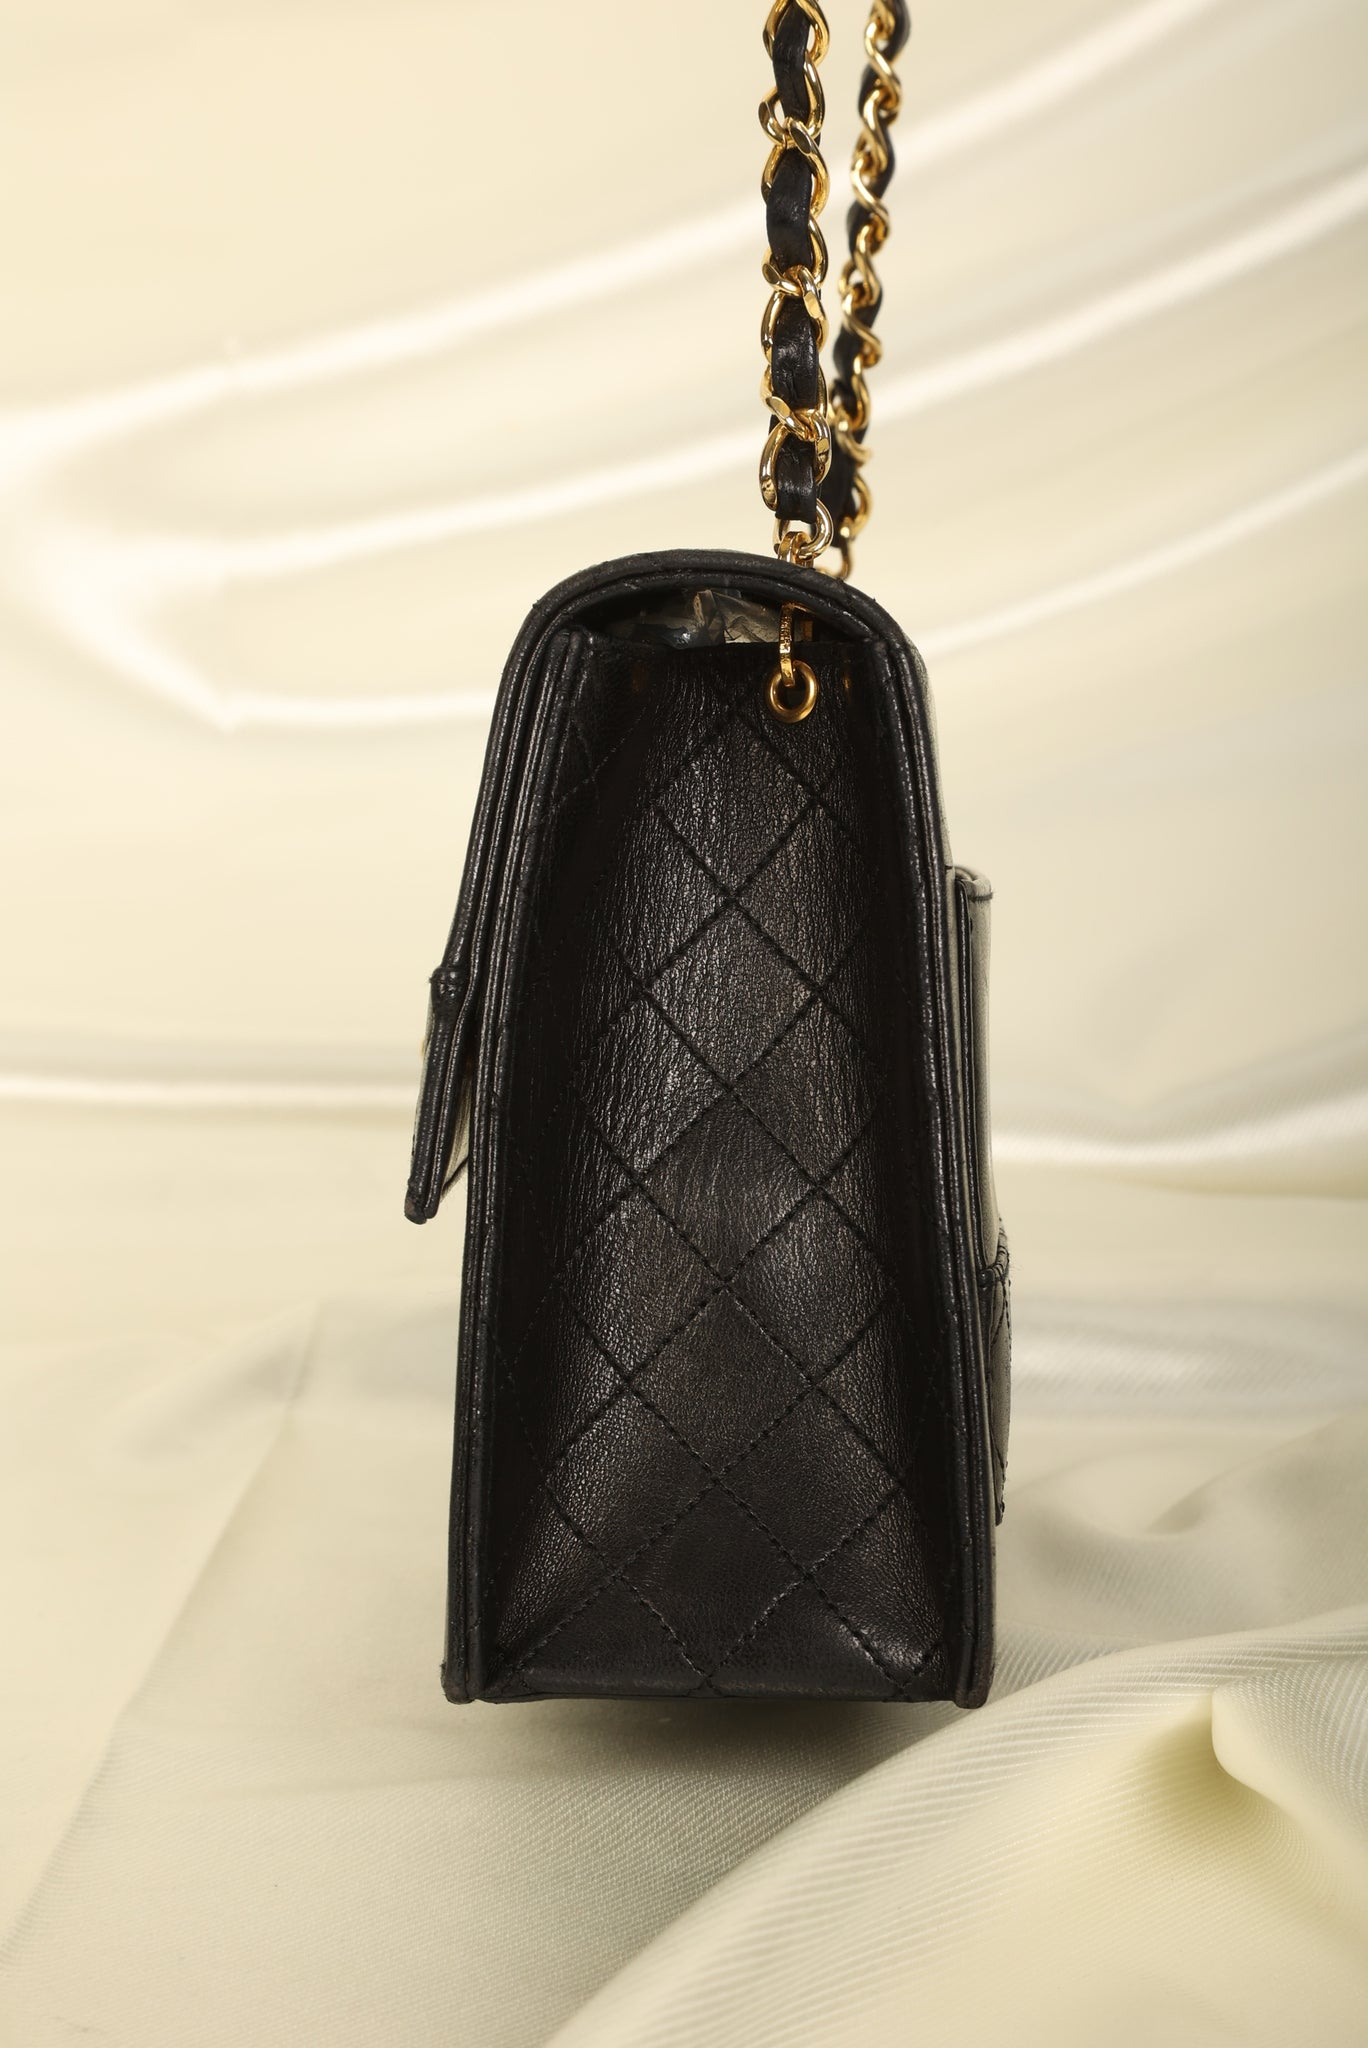 Rare Chanel Lambskin Mini Trapezoid with Pouch